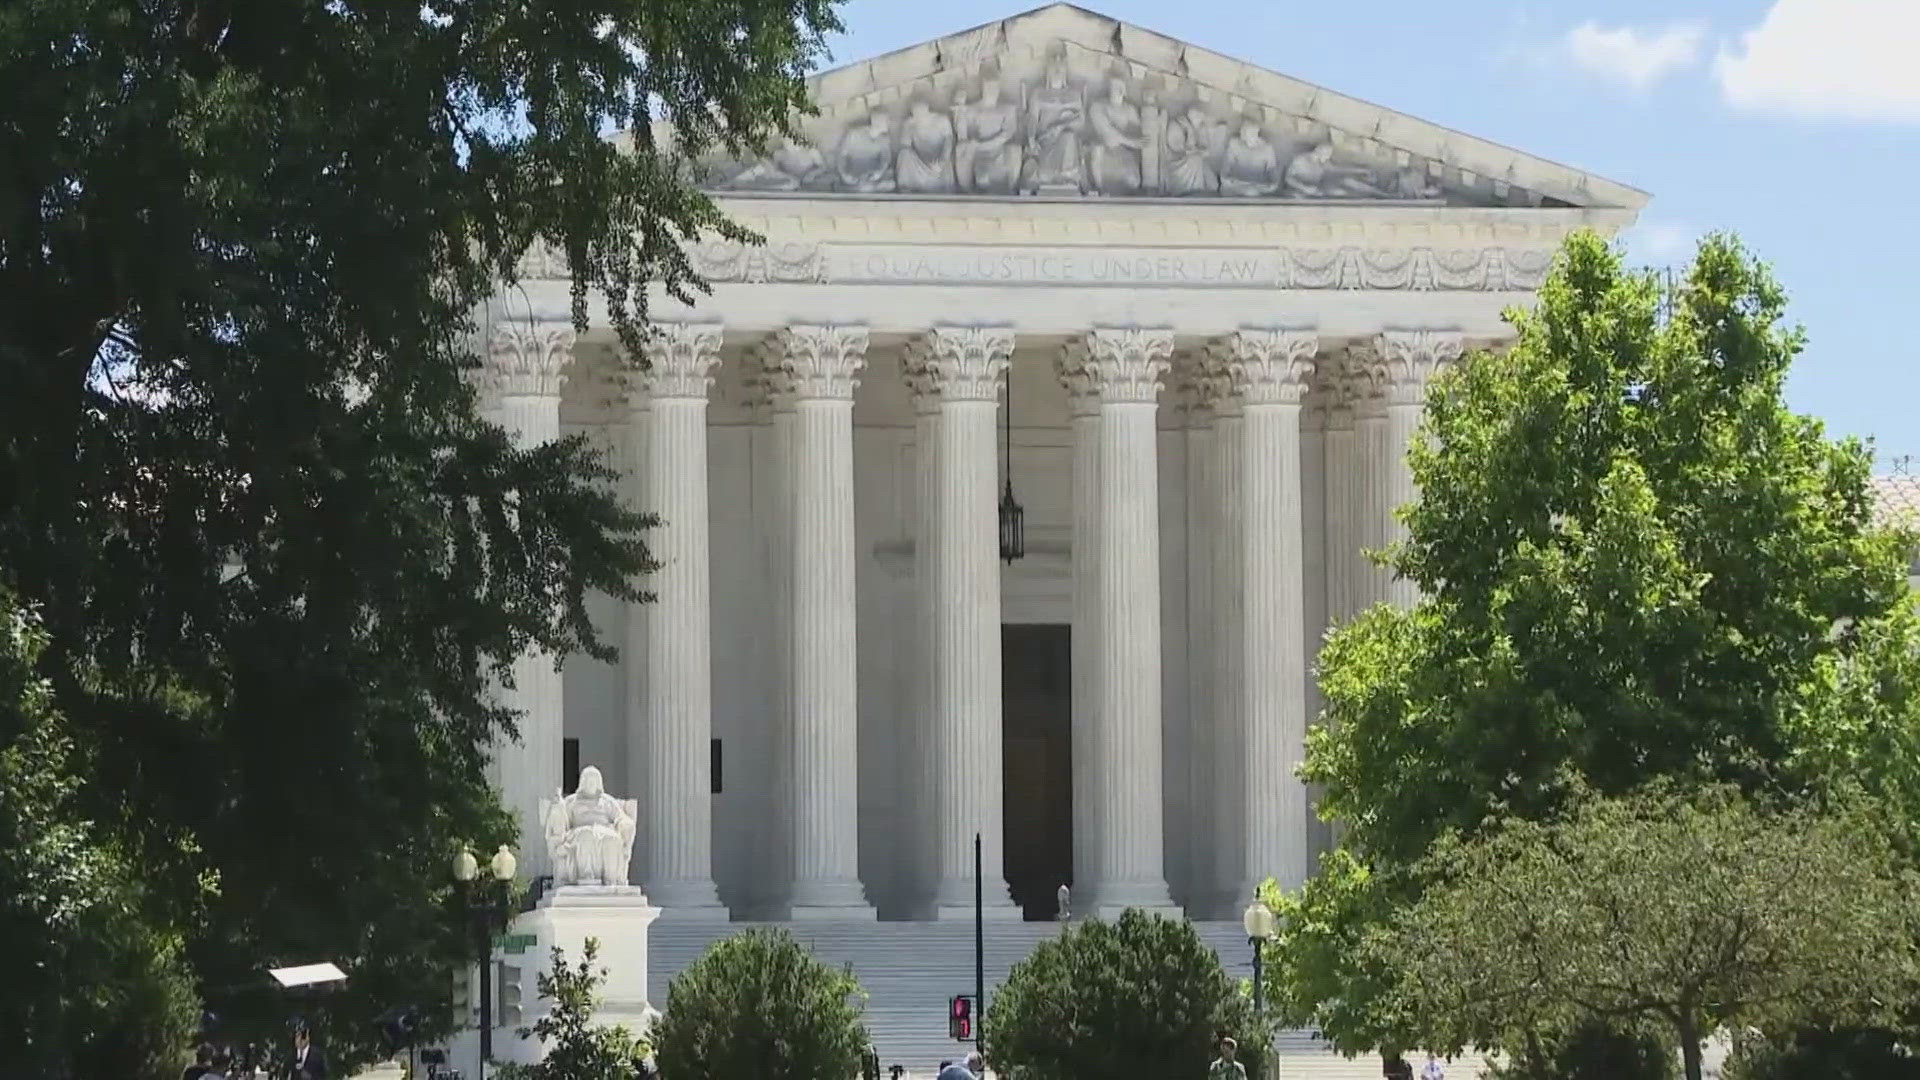 The justices said for the first time that former presidents have absolute immunity from prosecution for their official acts and no immunity for unofficial acts.